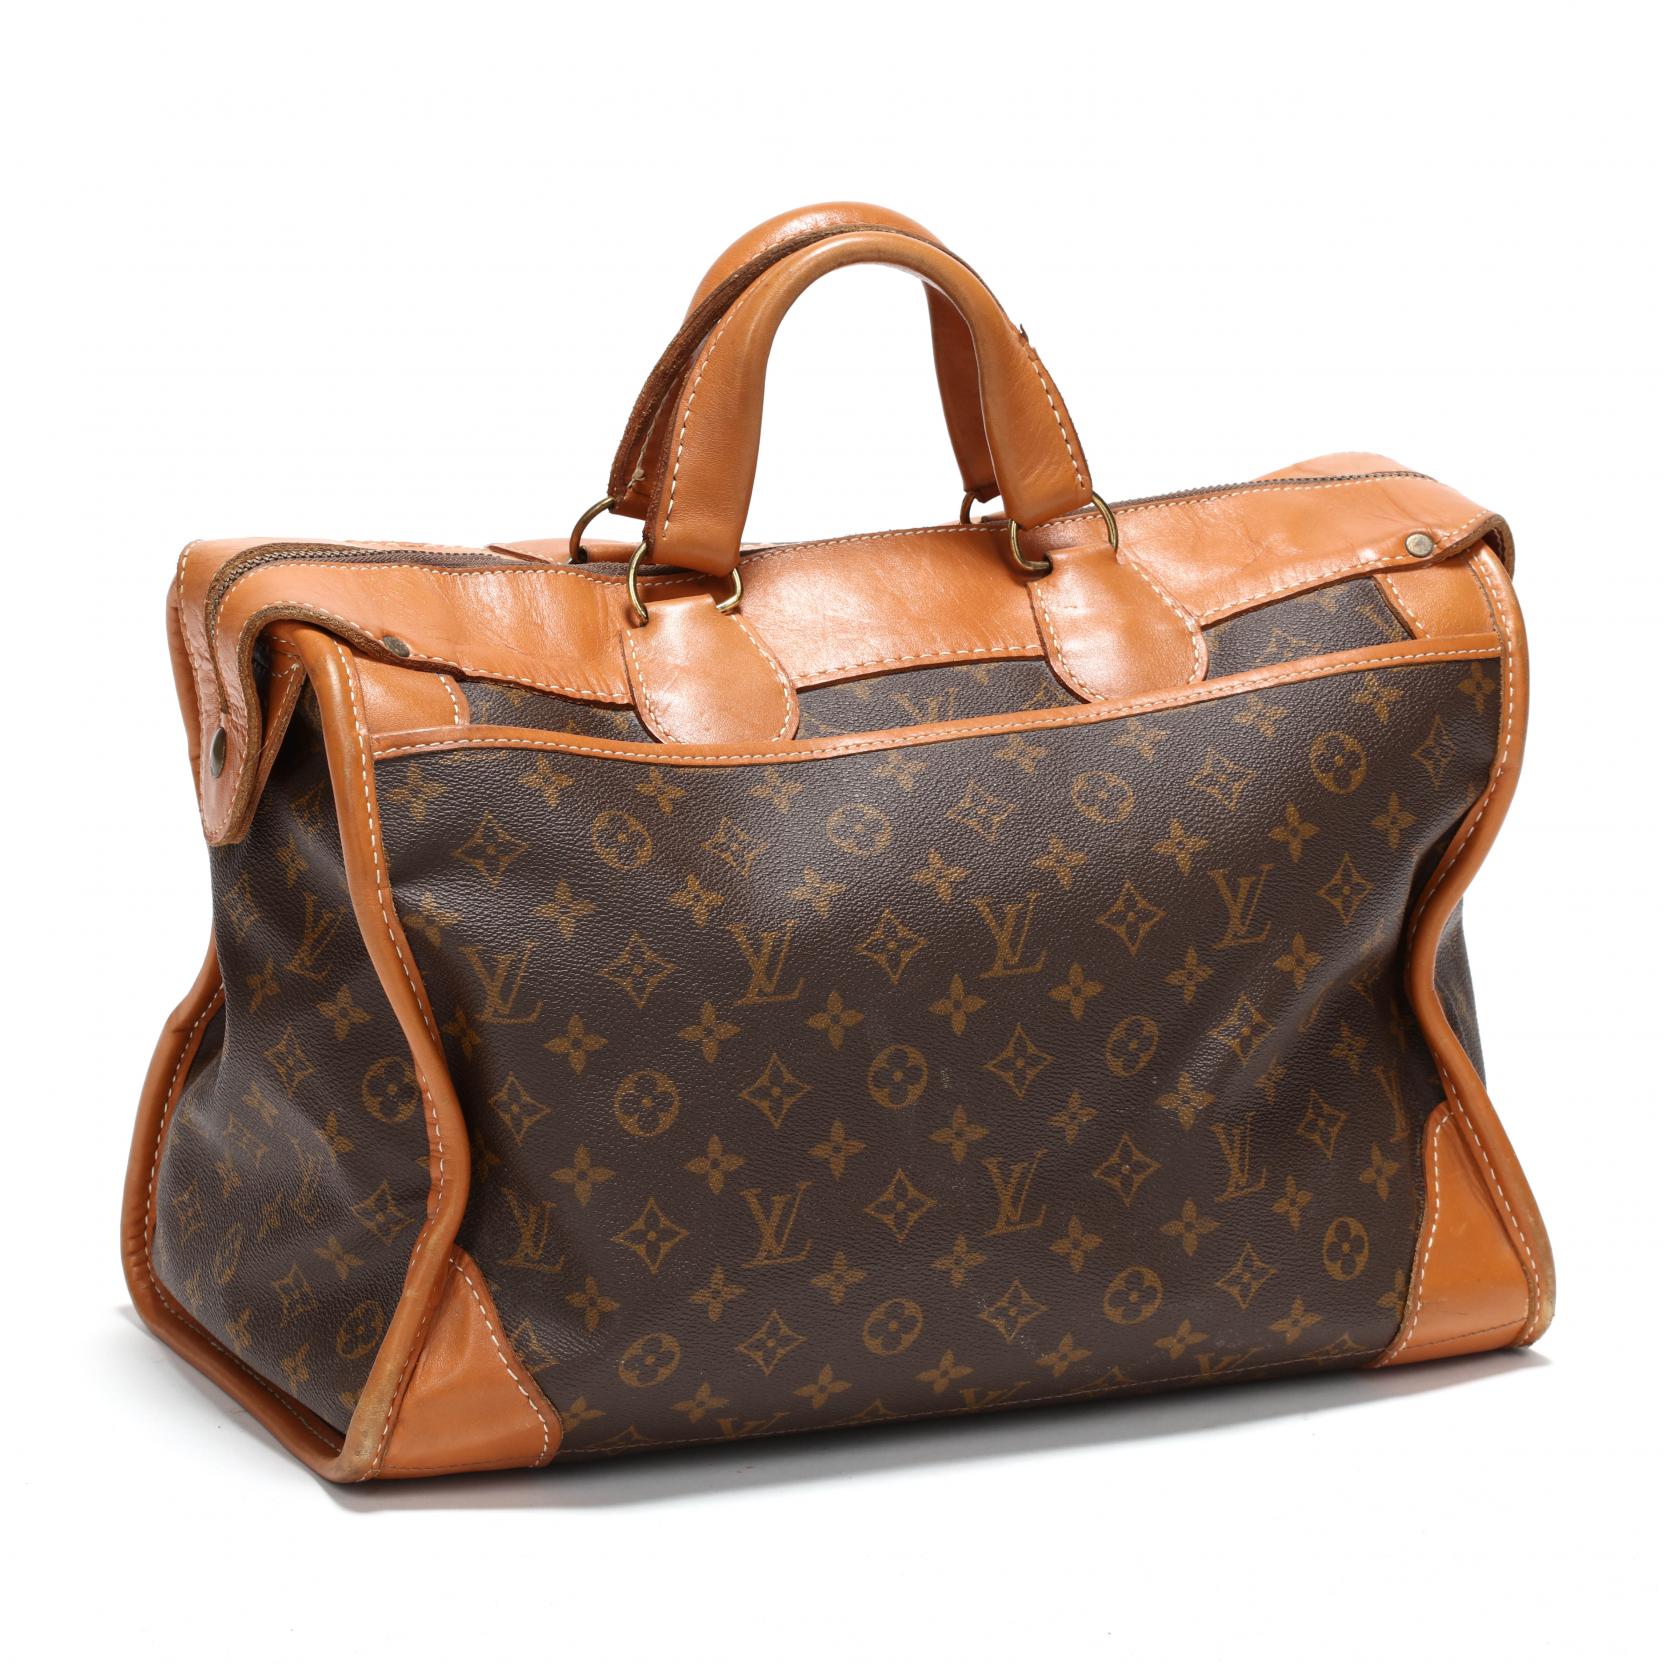 Lot - Louis Vuitton French Company Weekend Travel Bag, 13 x 23 in